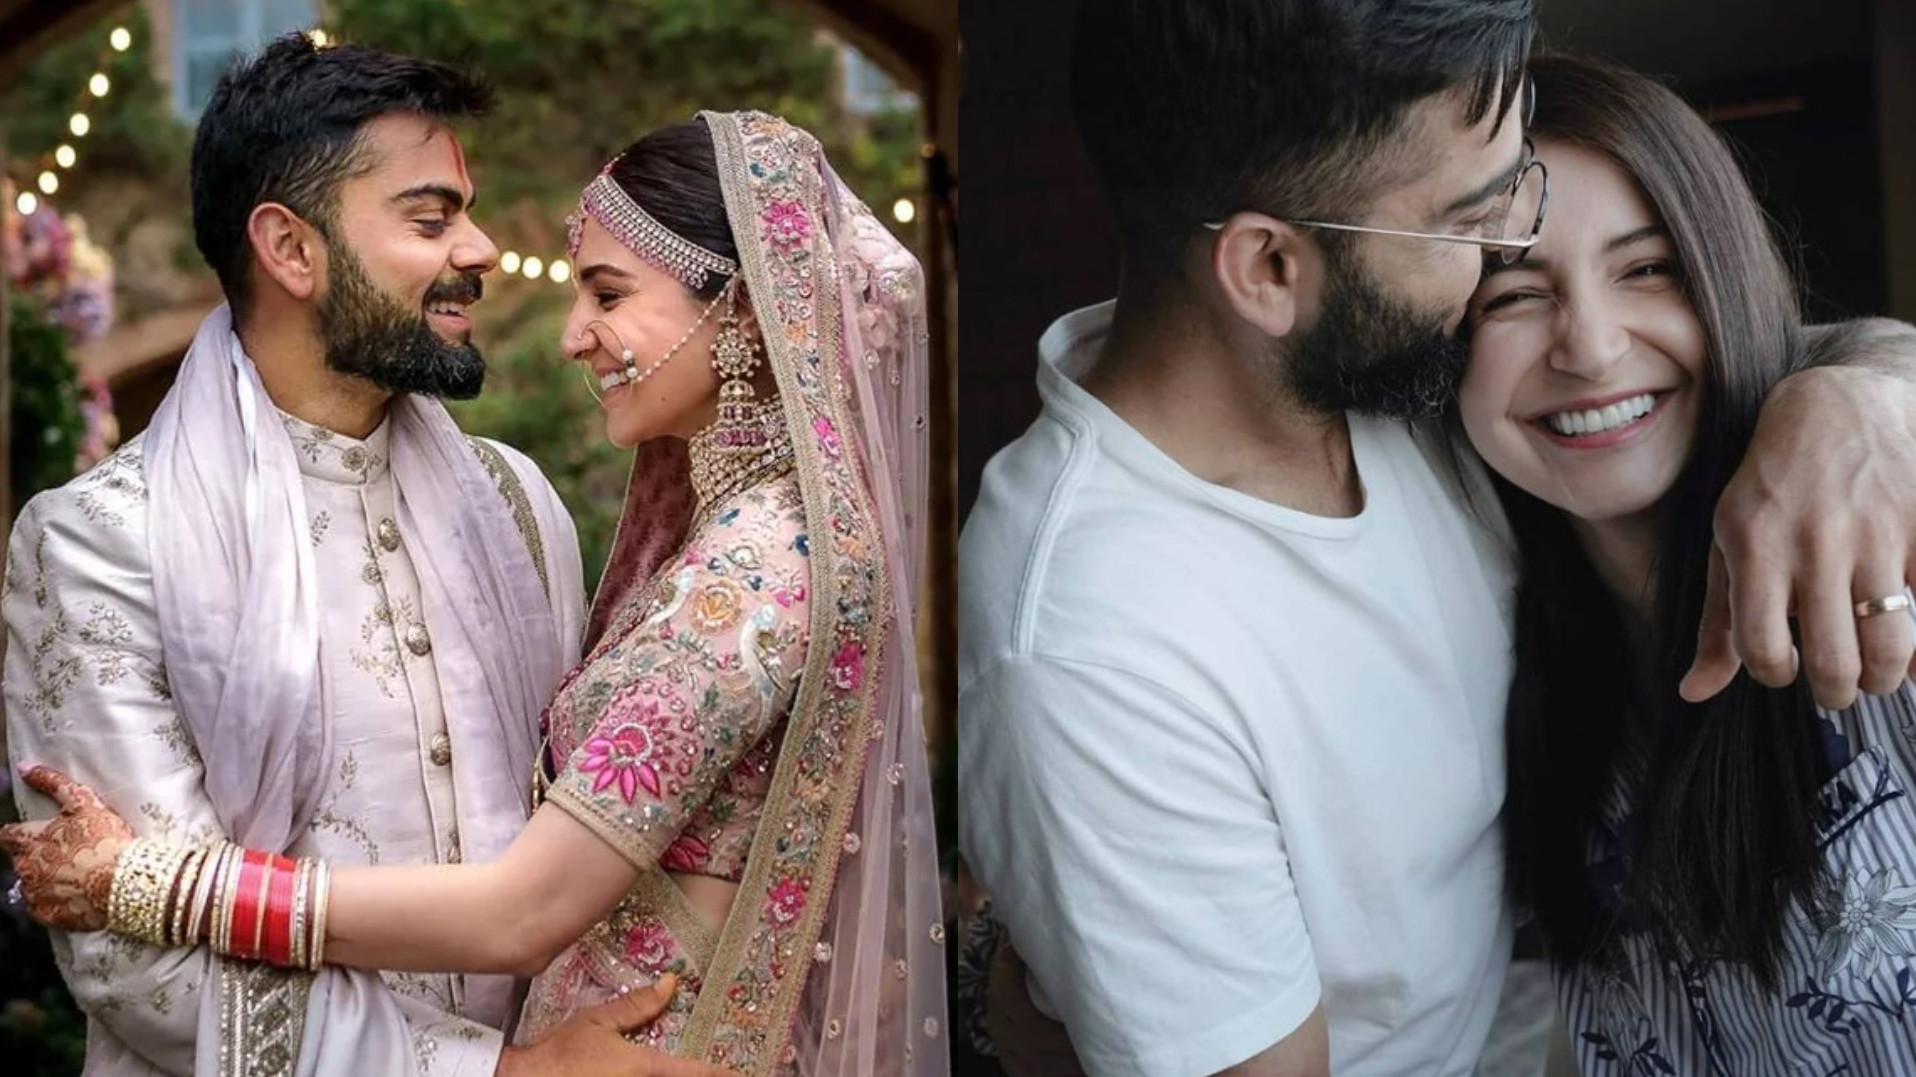 “5 years on a journey for eternity”- Virat Kohli and Anushka Sharma share lovely posts on marriage anniversary